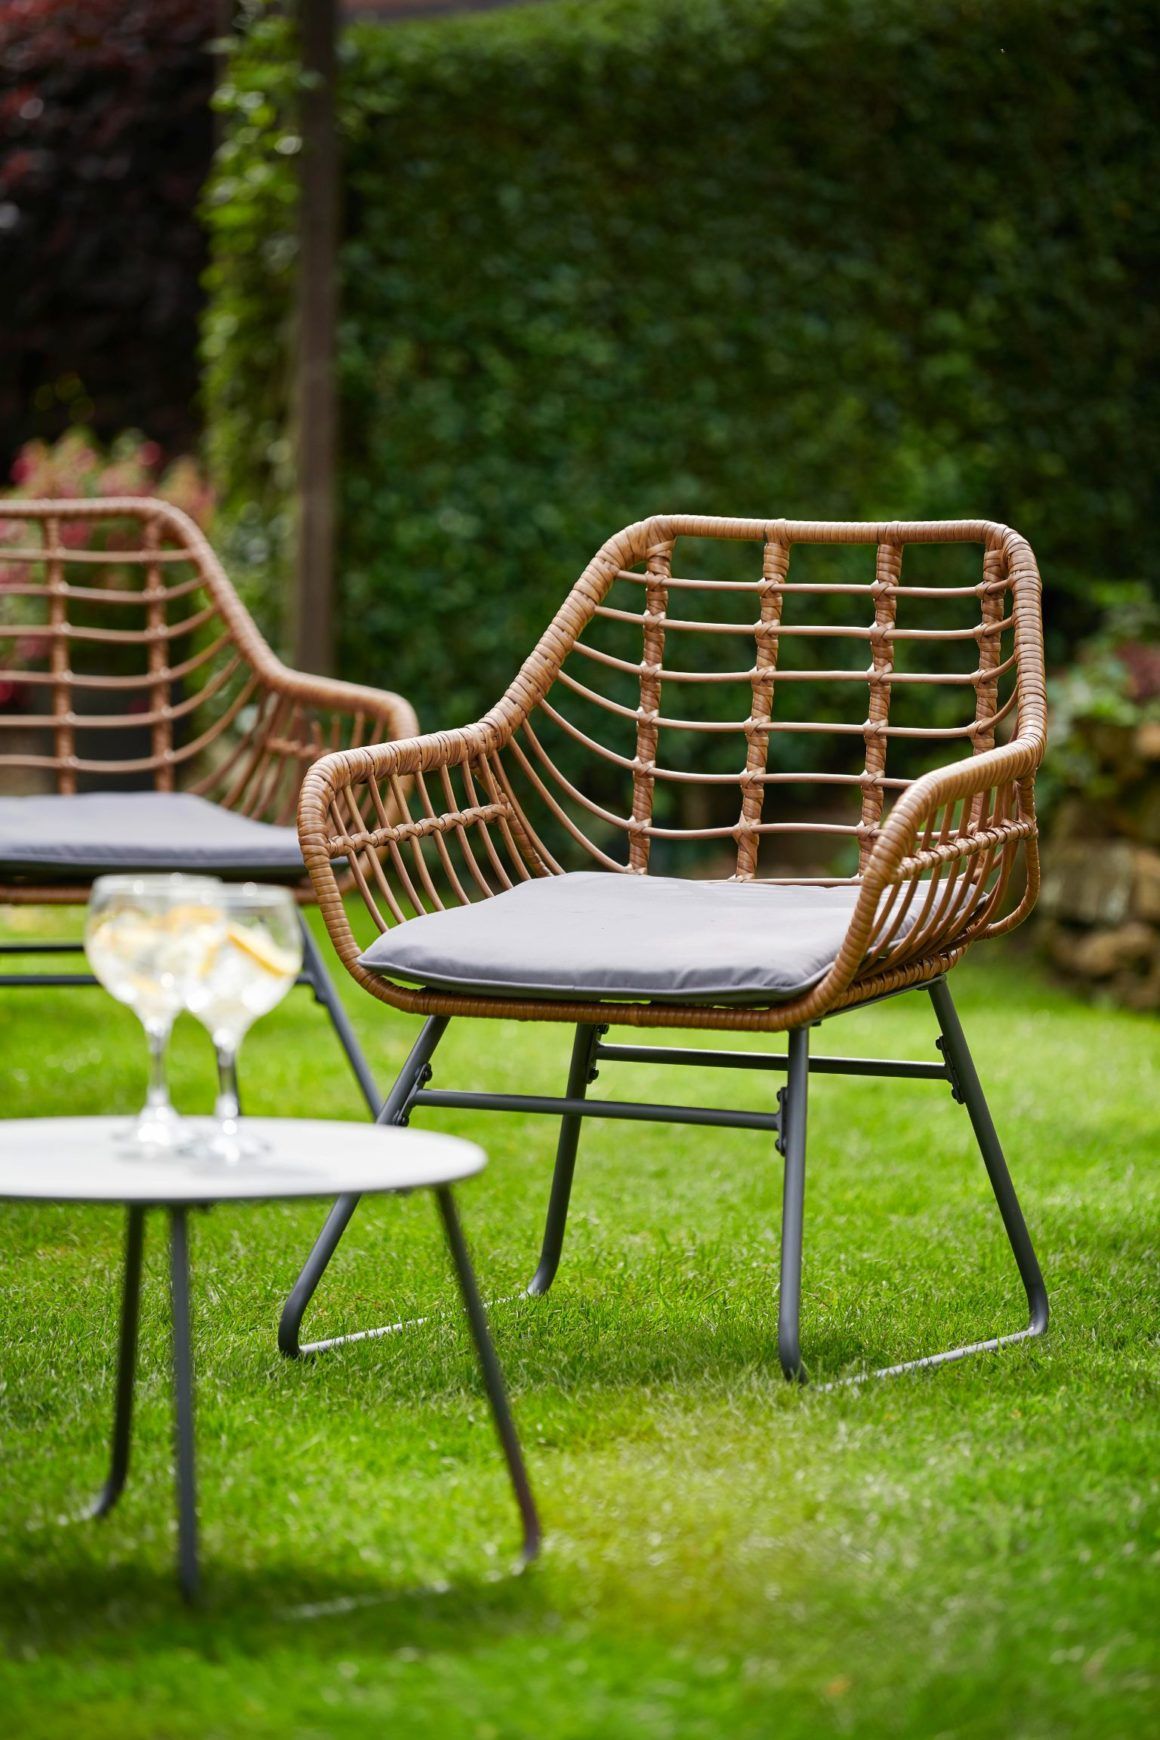 The Durable Beauty of Rattan Outdoor Furniture